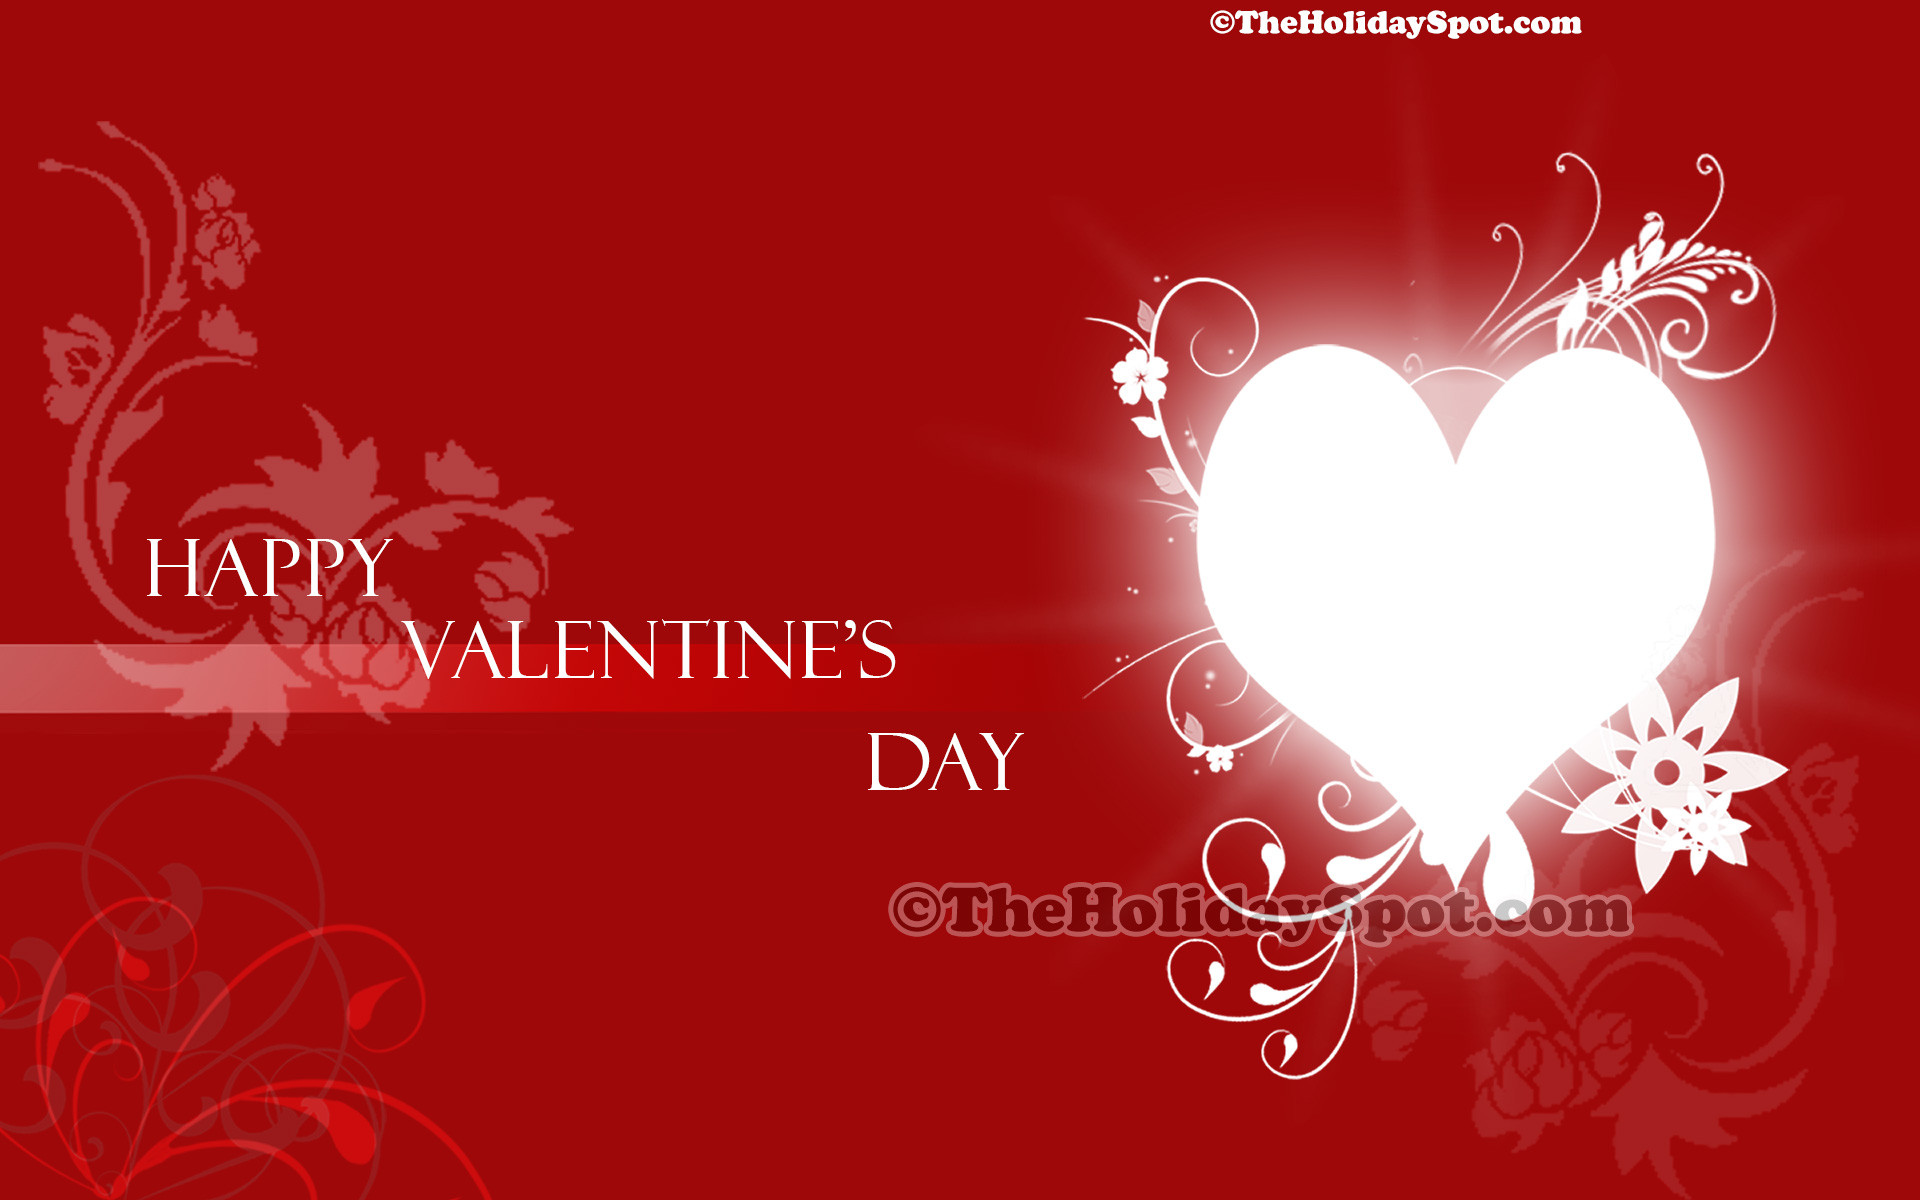 1920x1200 83 Free Valentine's Day HD Wallpapers for Download - Background Images,  Desktop Wallpapers